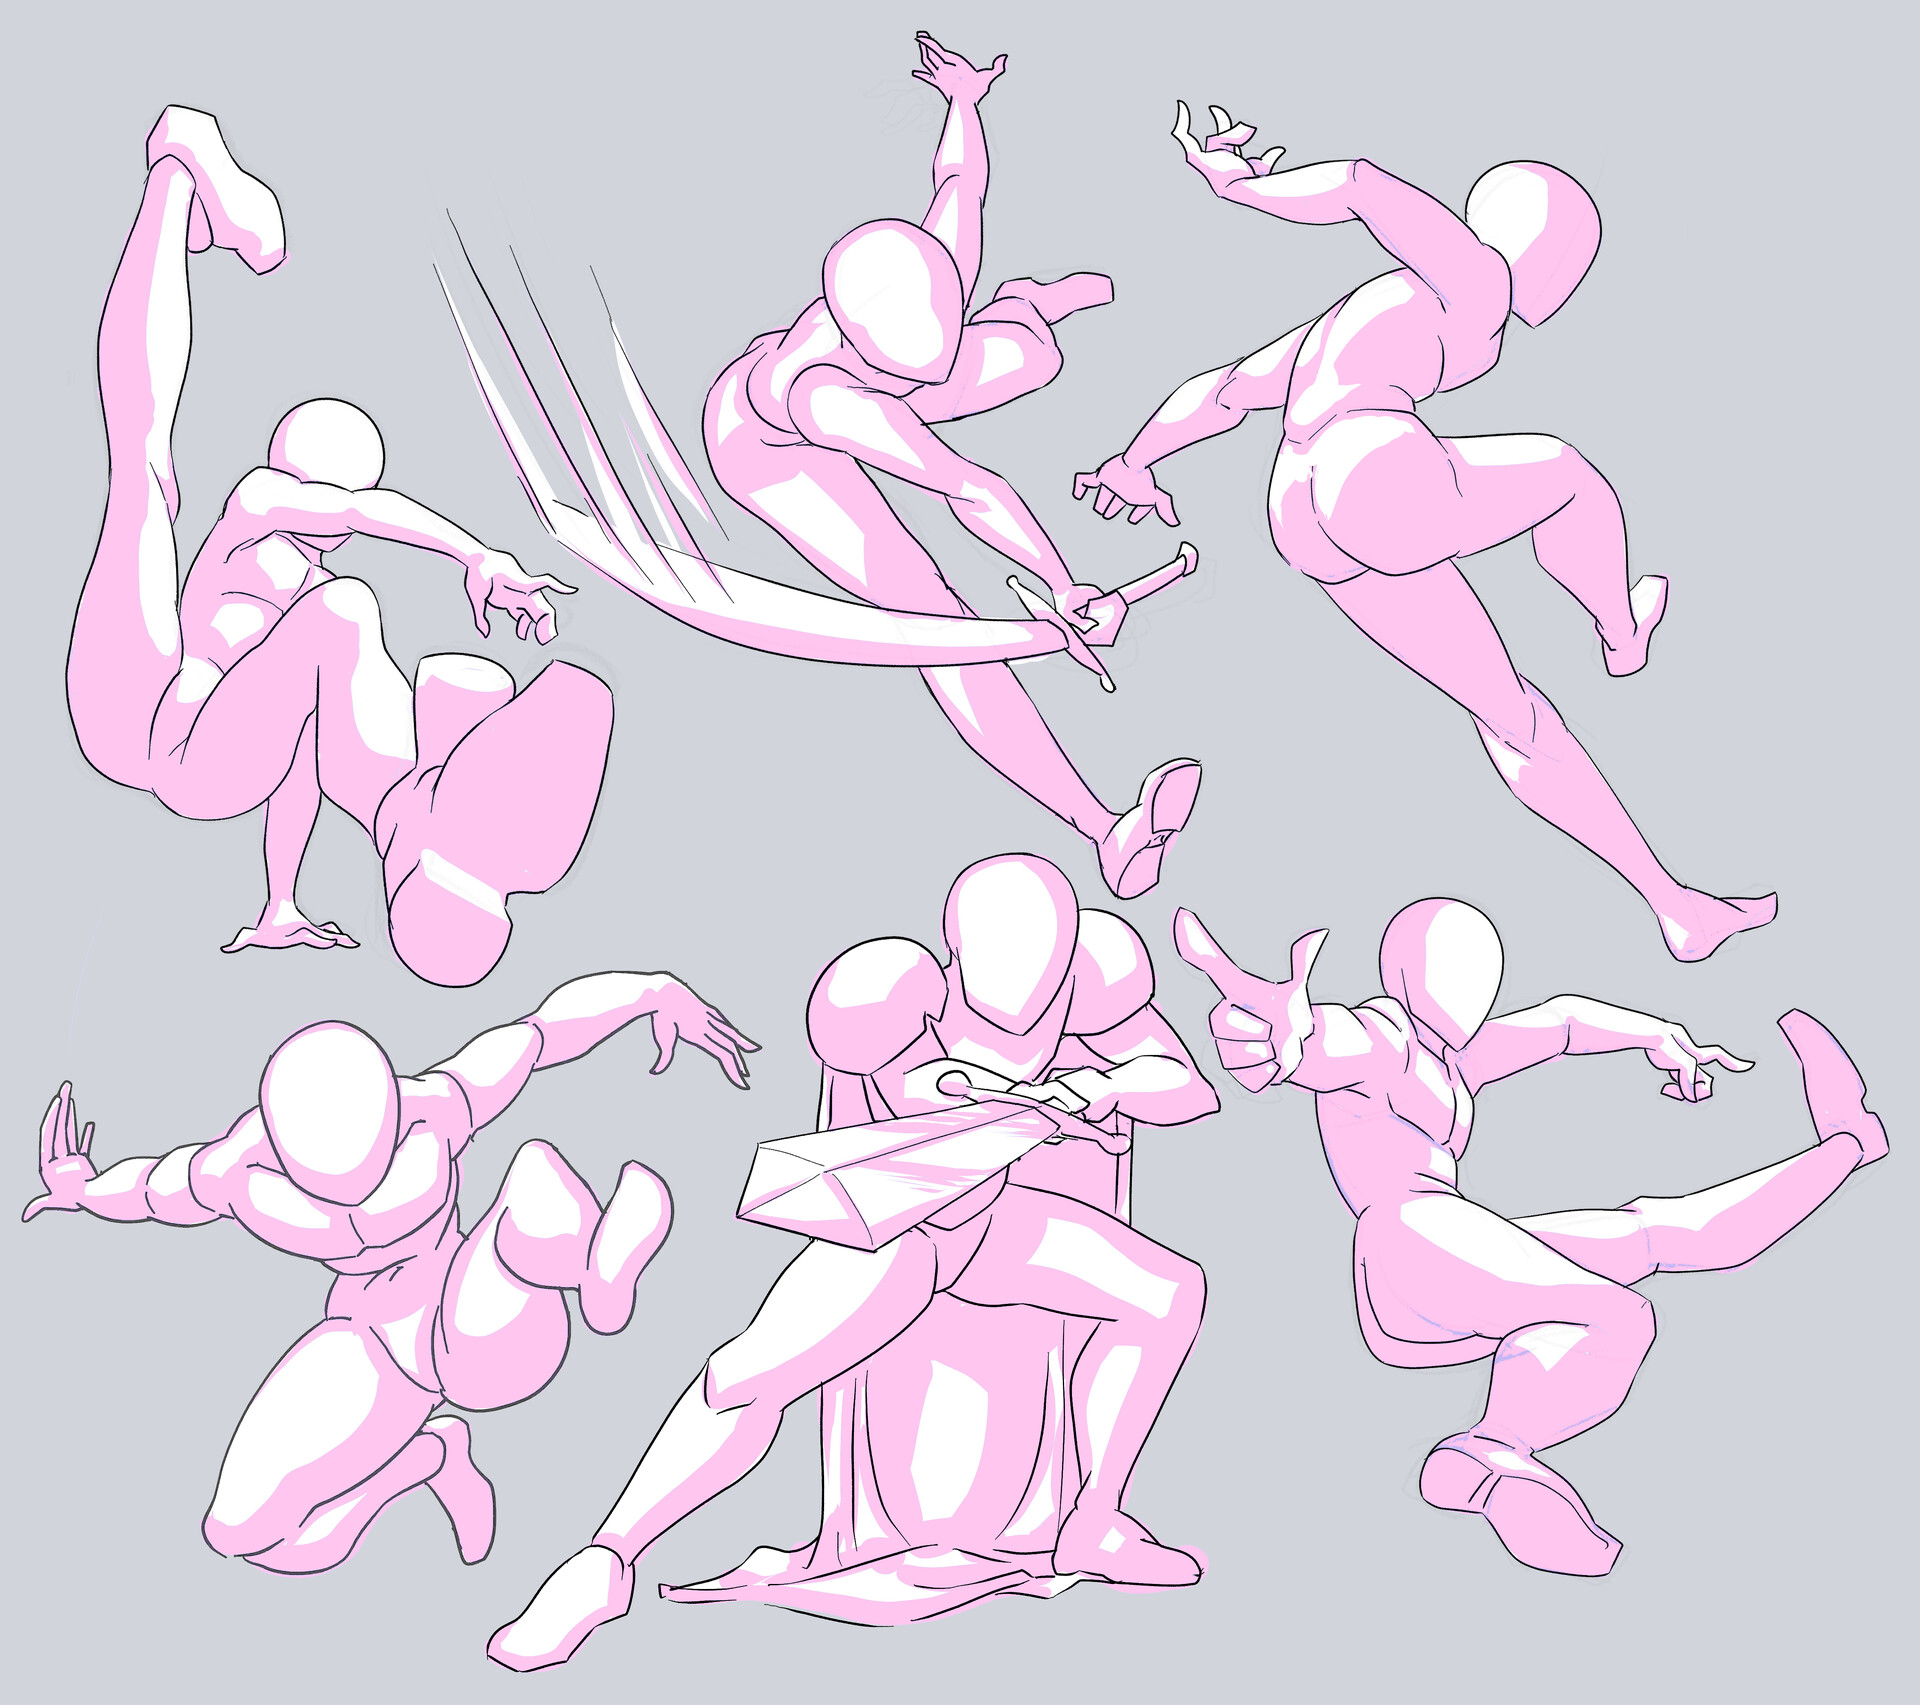 Woman Stock Practice 3 - Swordwomen by Azizla on deviantART | Anime poses  reference, Drawing reference poses, Drawing reference